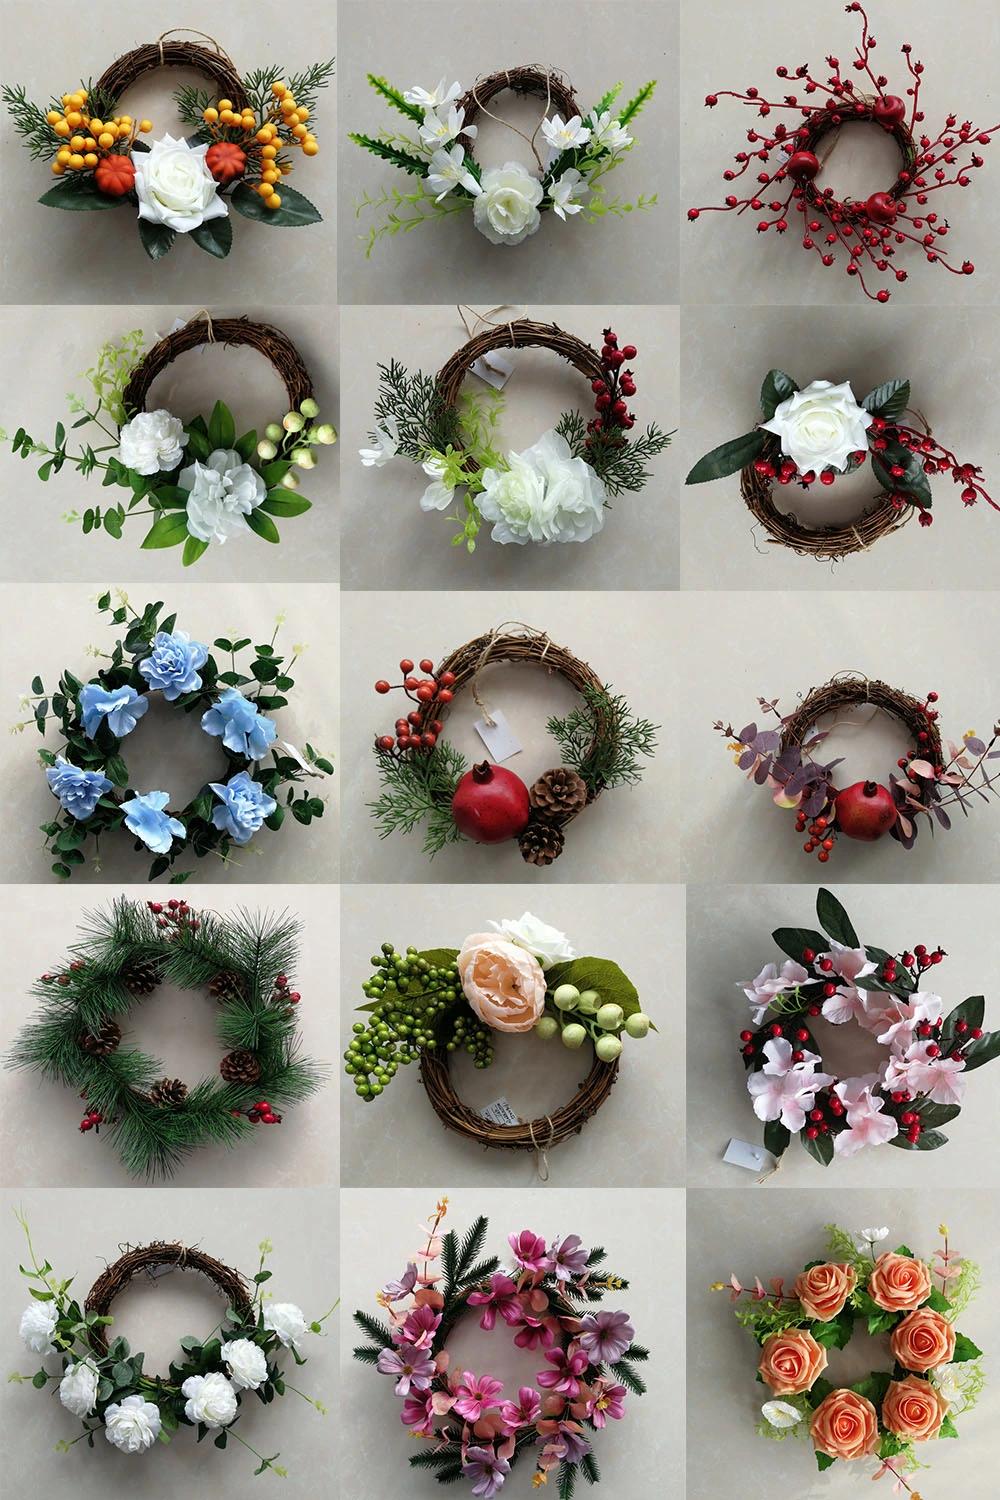 Hot Sale 24inch Wreath with Cotton and Red Berry Gift Christmas Decoration Wreath